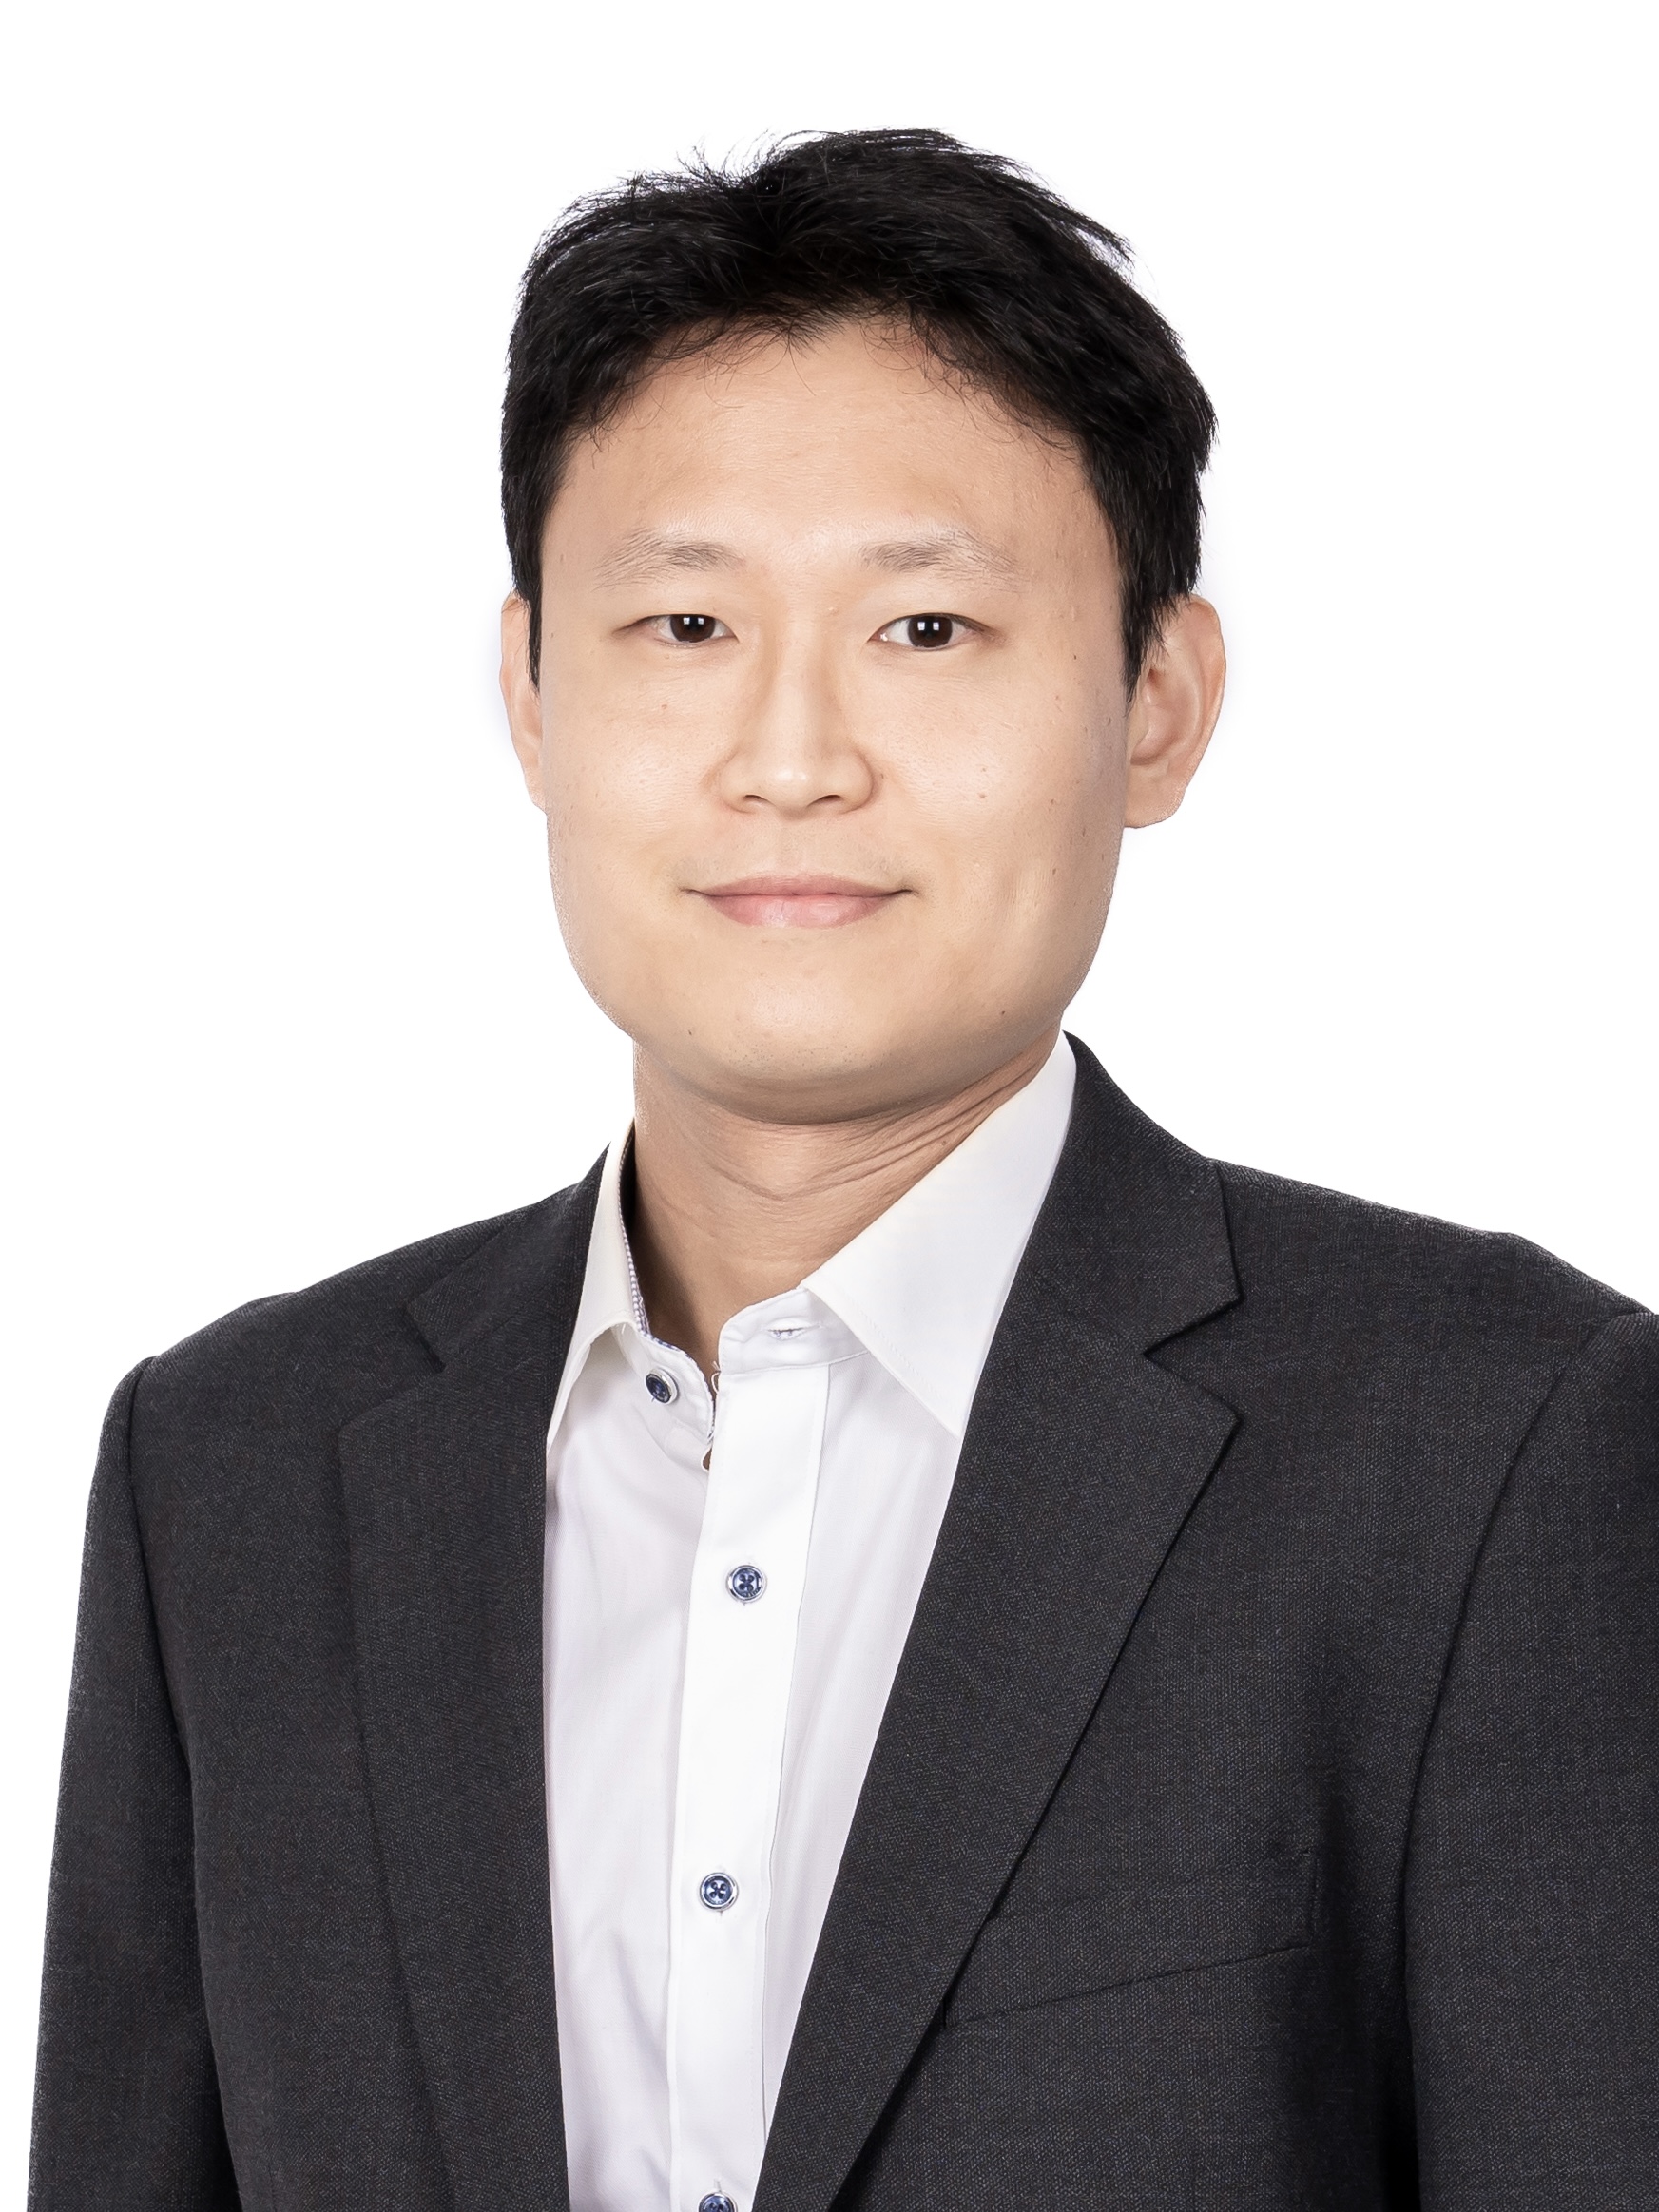 researcher image '박상현'